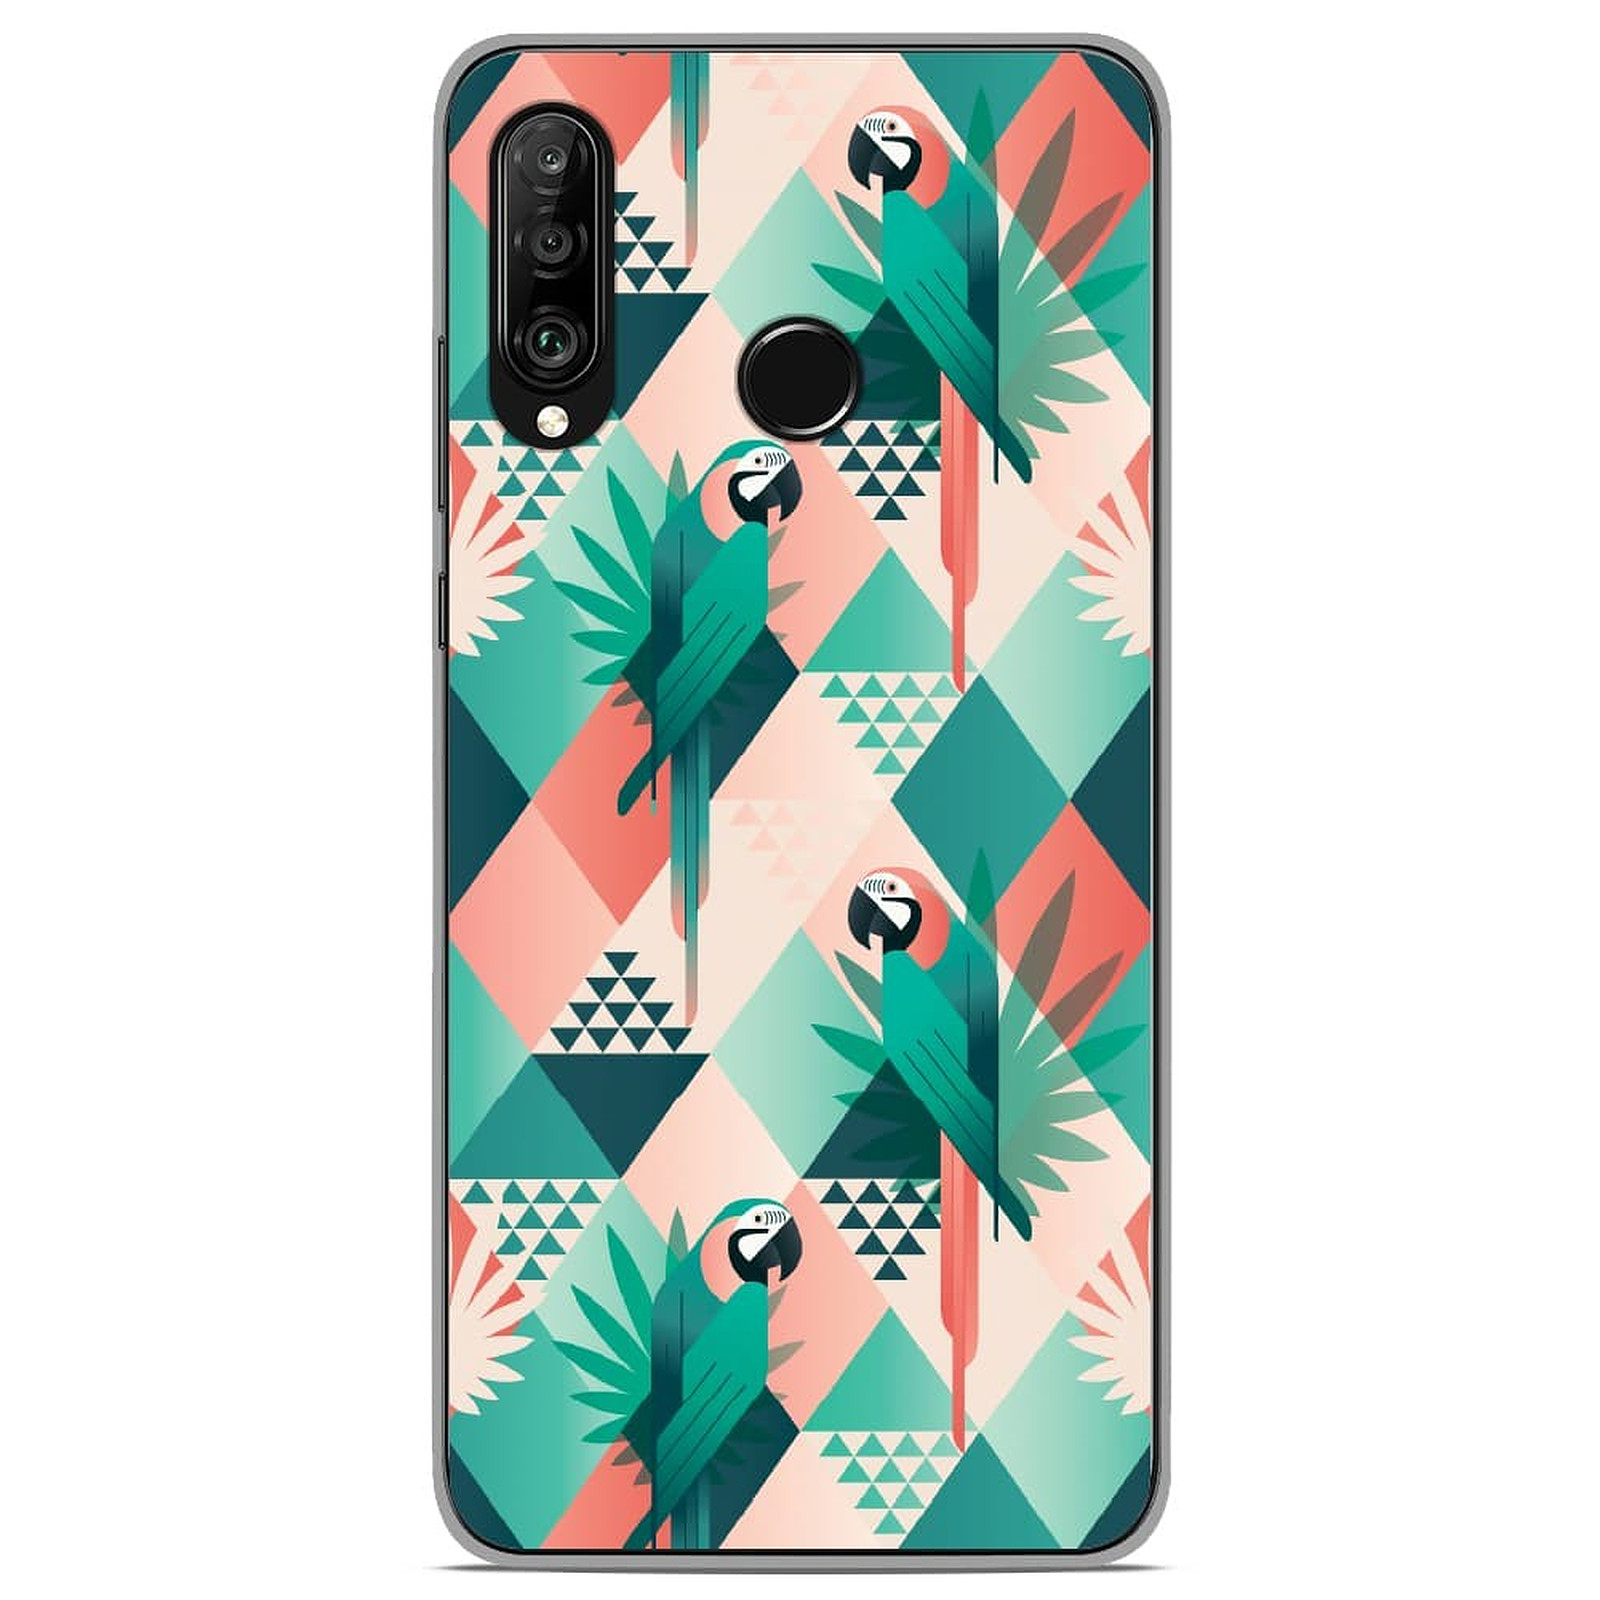 1001 Coques Coque silicone gel Huawei P30 Lite motif Perroquet ge´ome´trique - Coque telephone 1001Coques